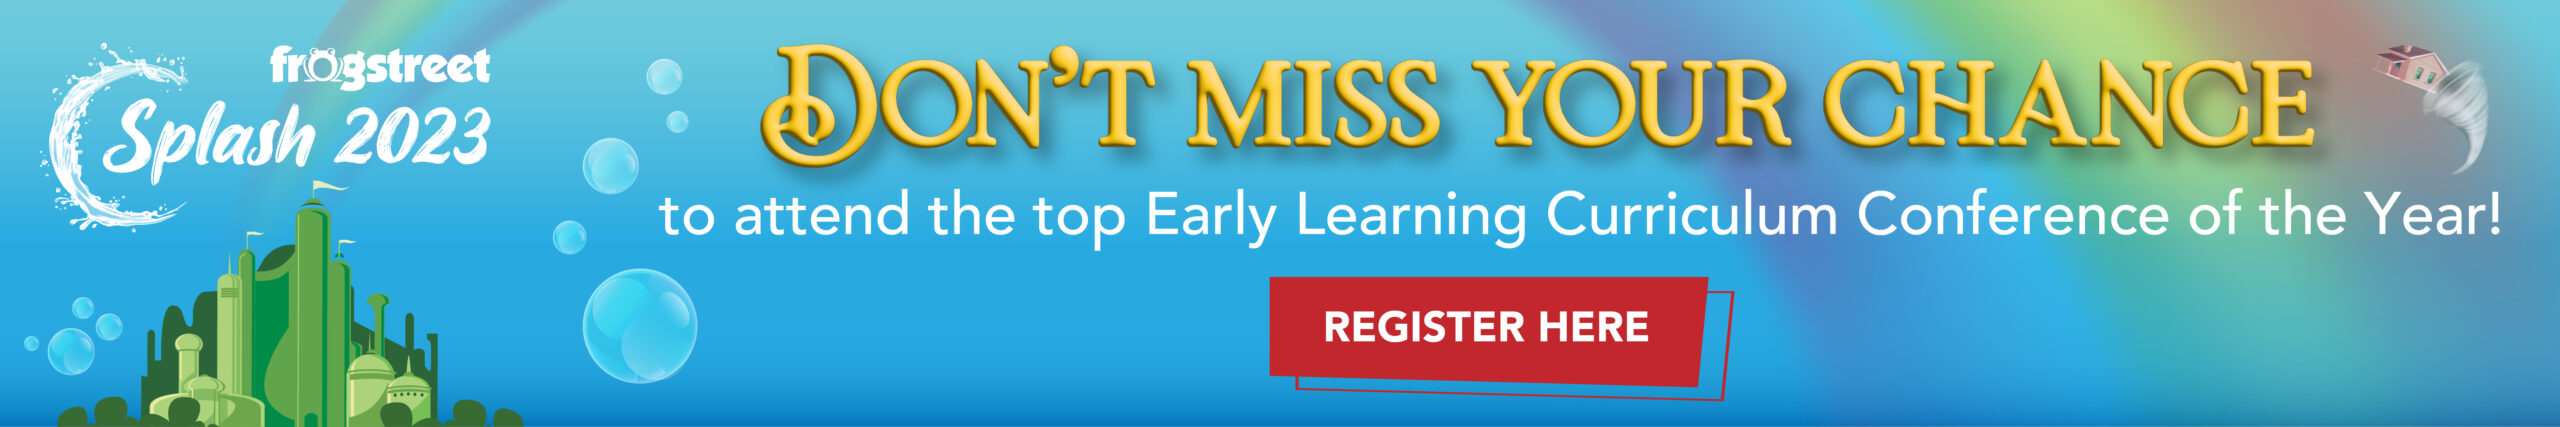 Frog Street Splash 2023
Don't miss your chance to attend the top Early Learning Curriculum Conference of the Year.  Register Here